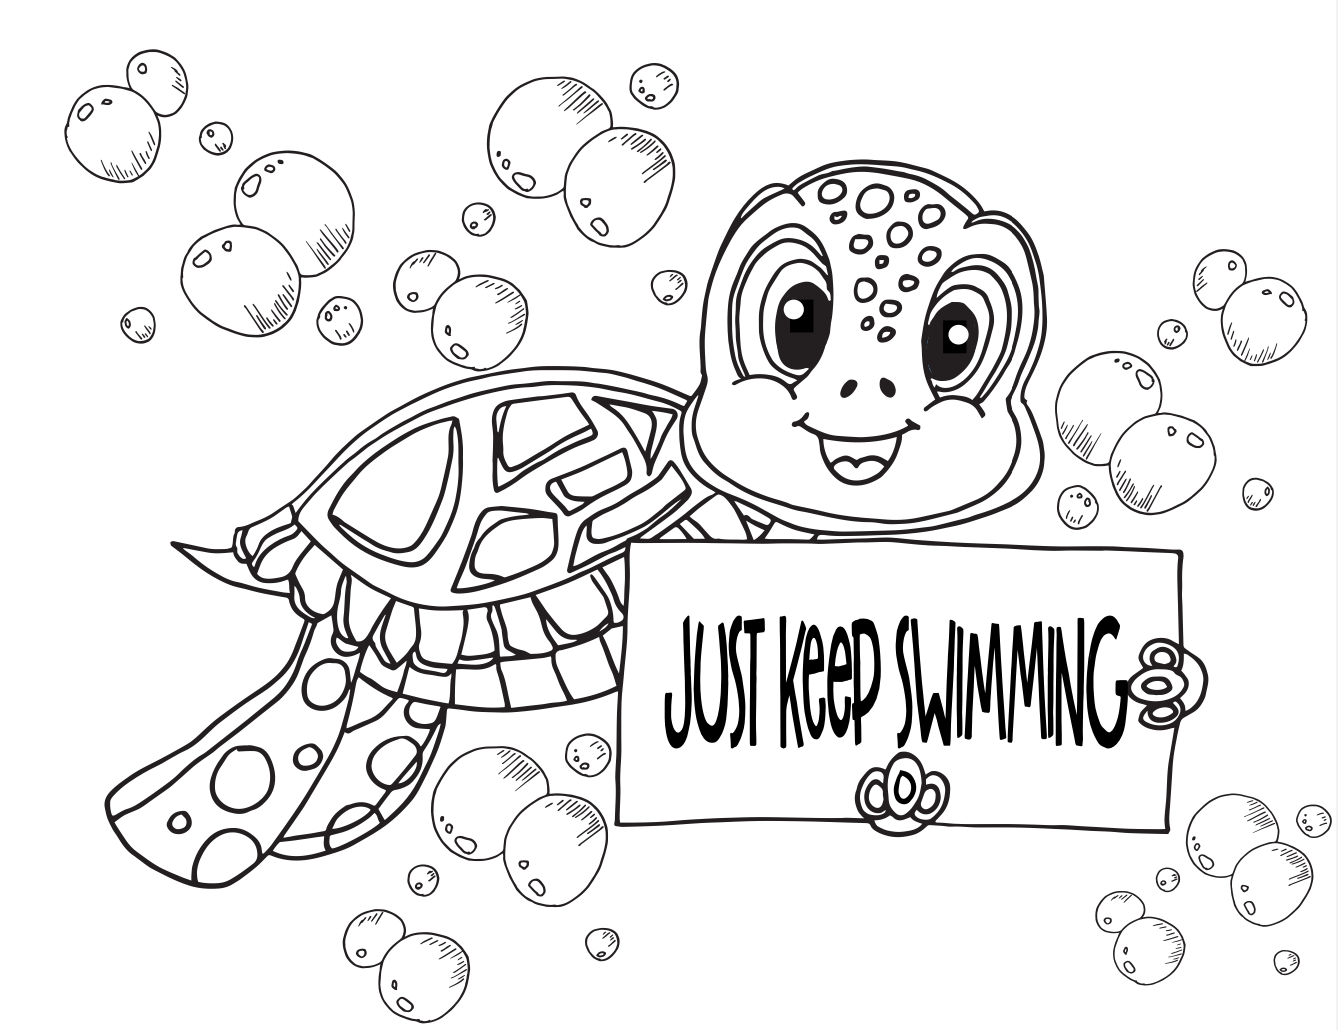 a cartoonish turtle drawing with big eyes is black and white and colorable, holding a sign that reads "Just keep swimming"